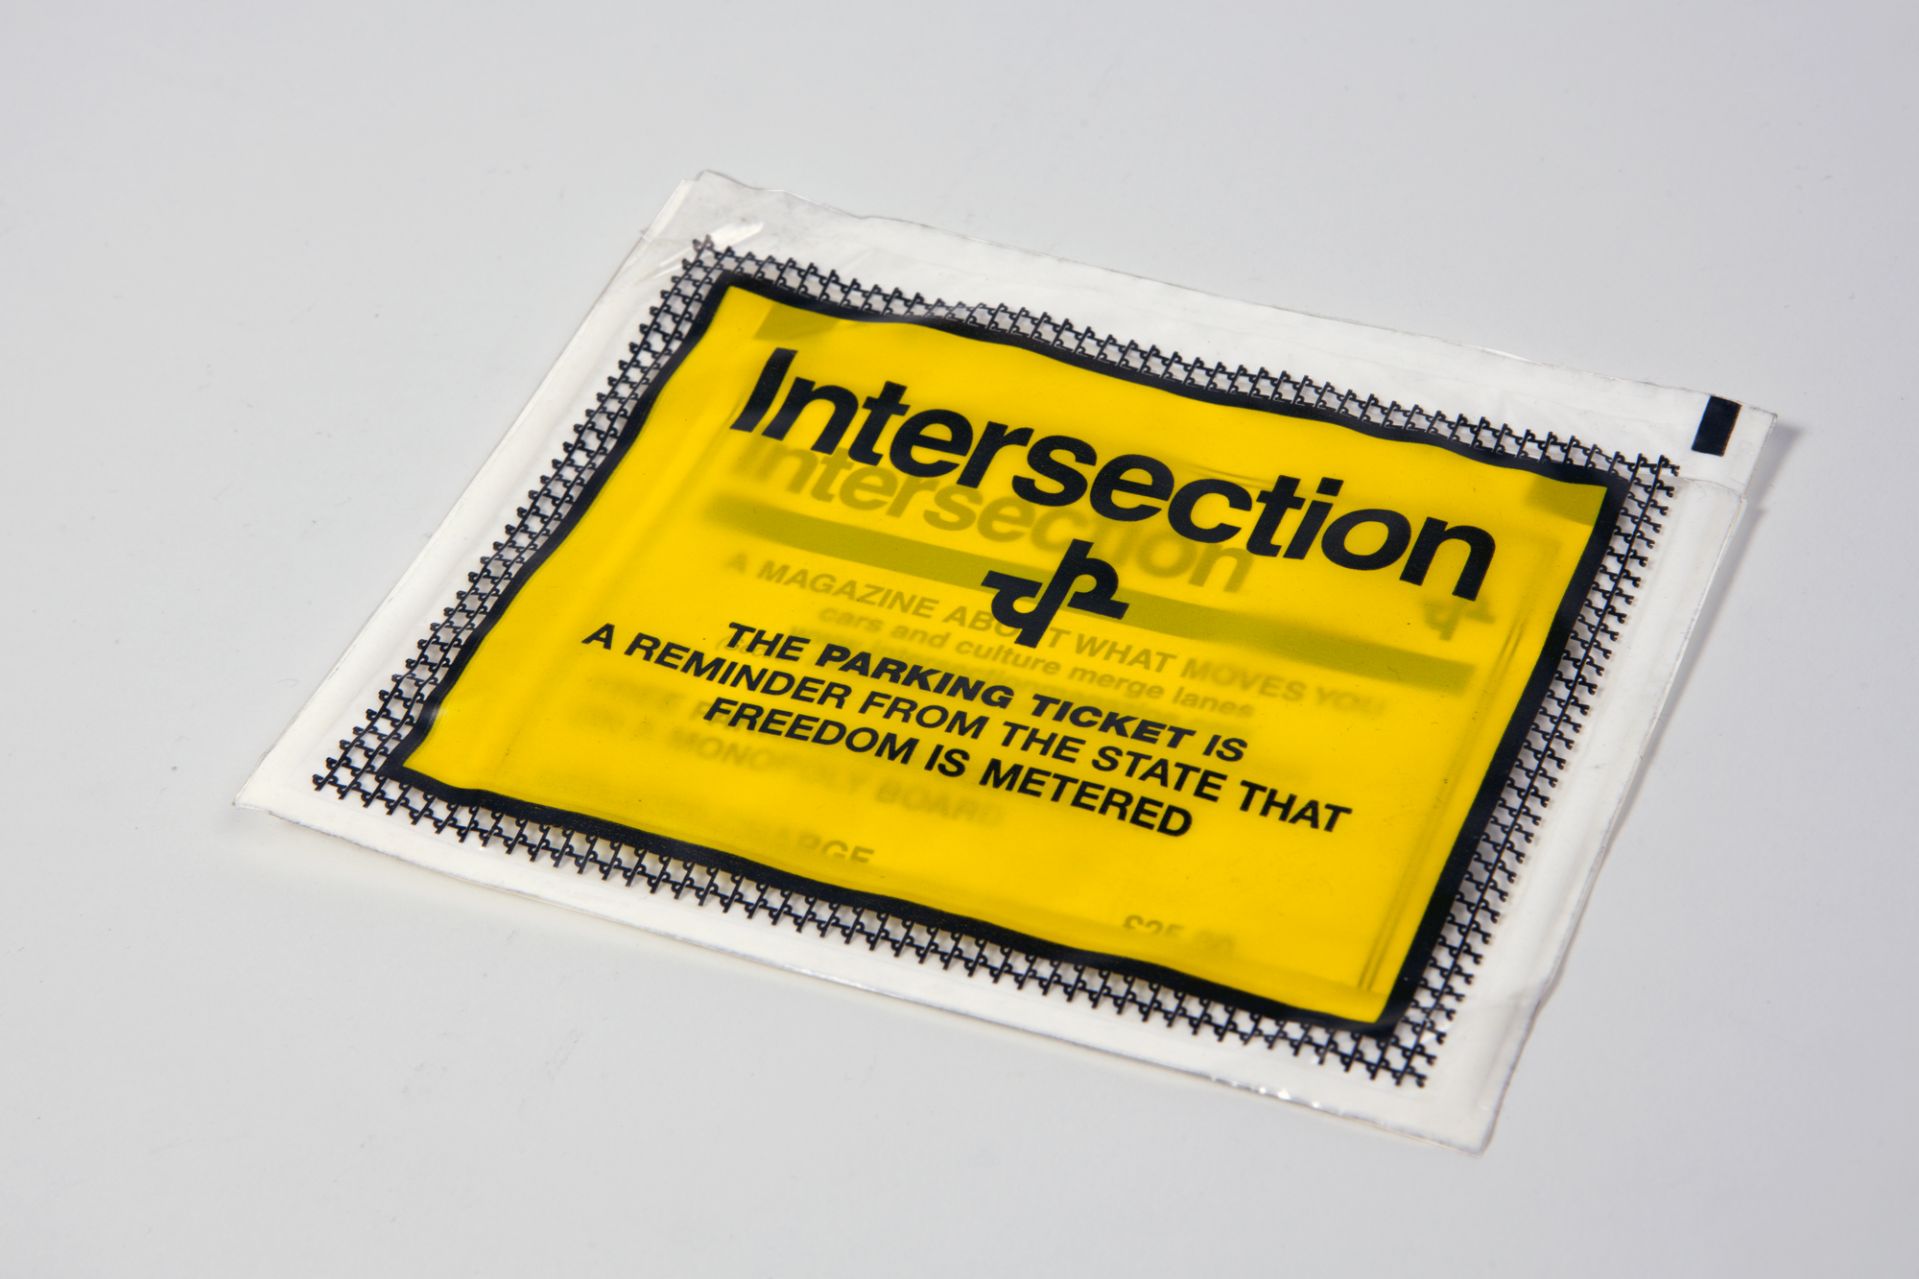 Intersection
Launch kit